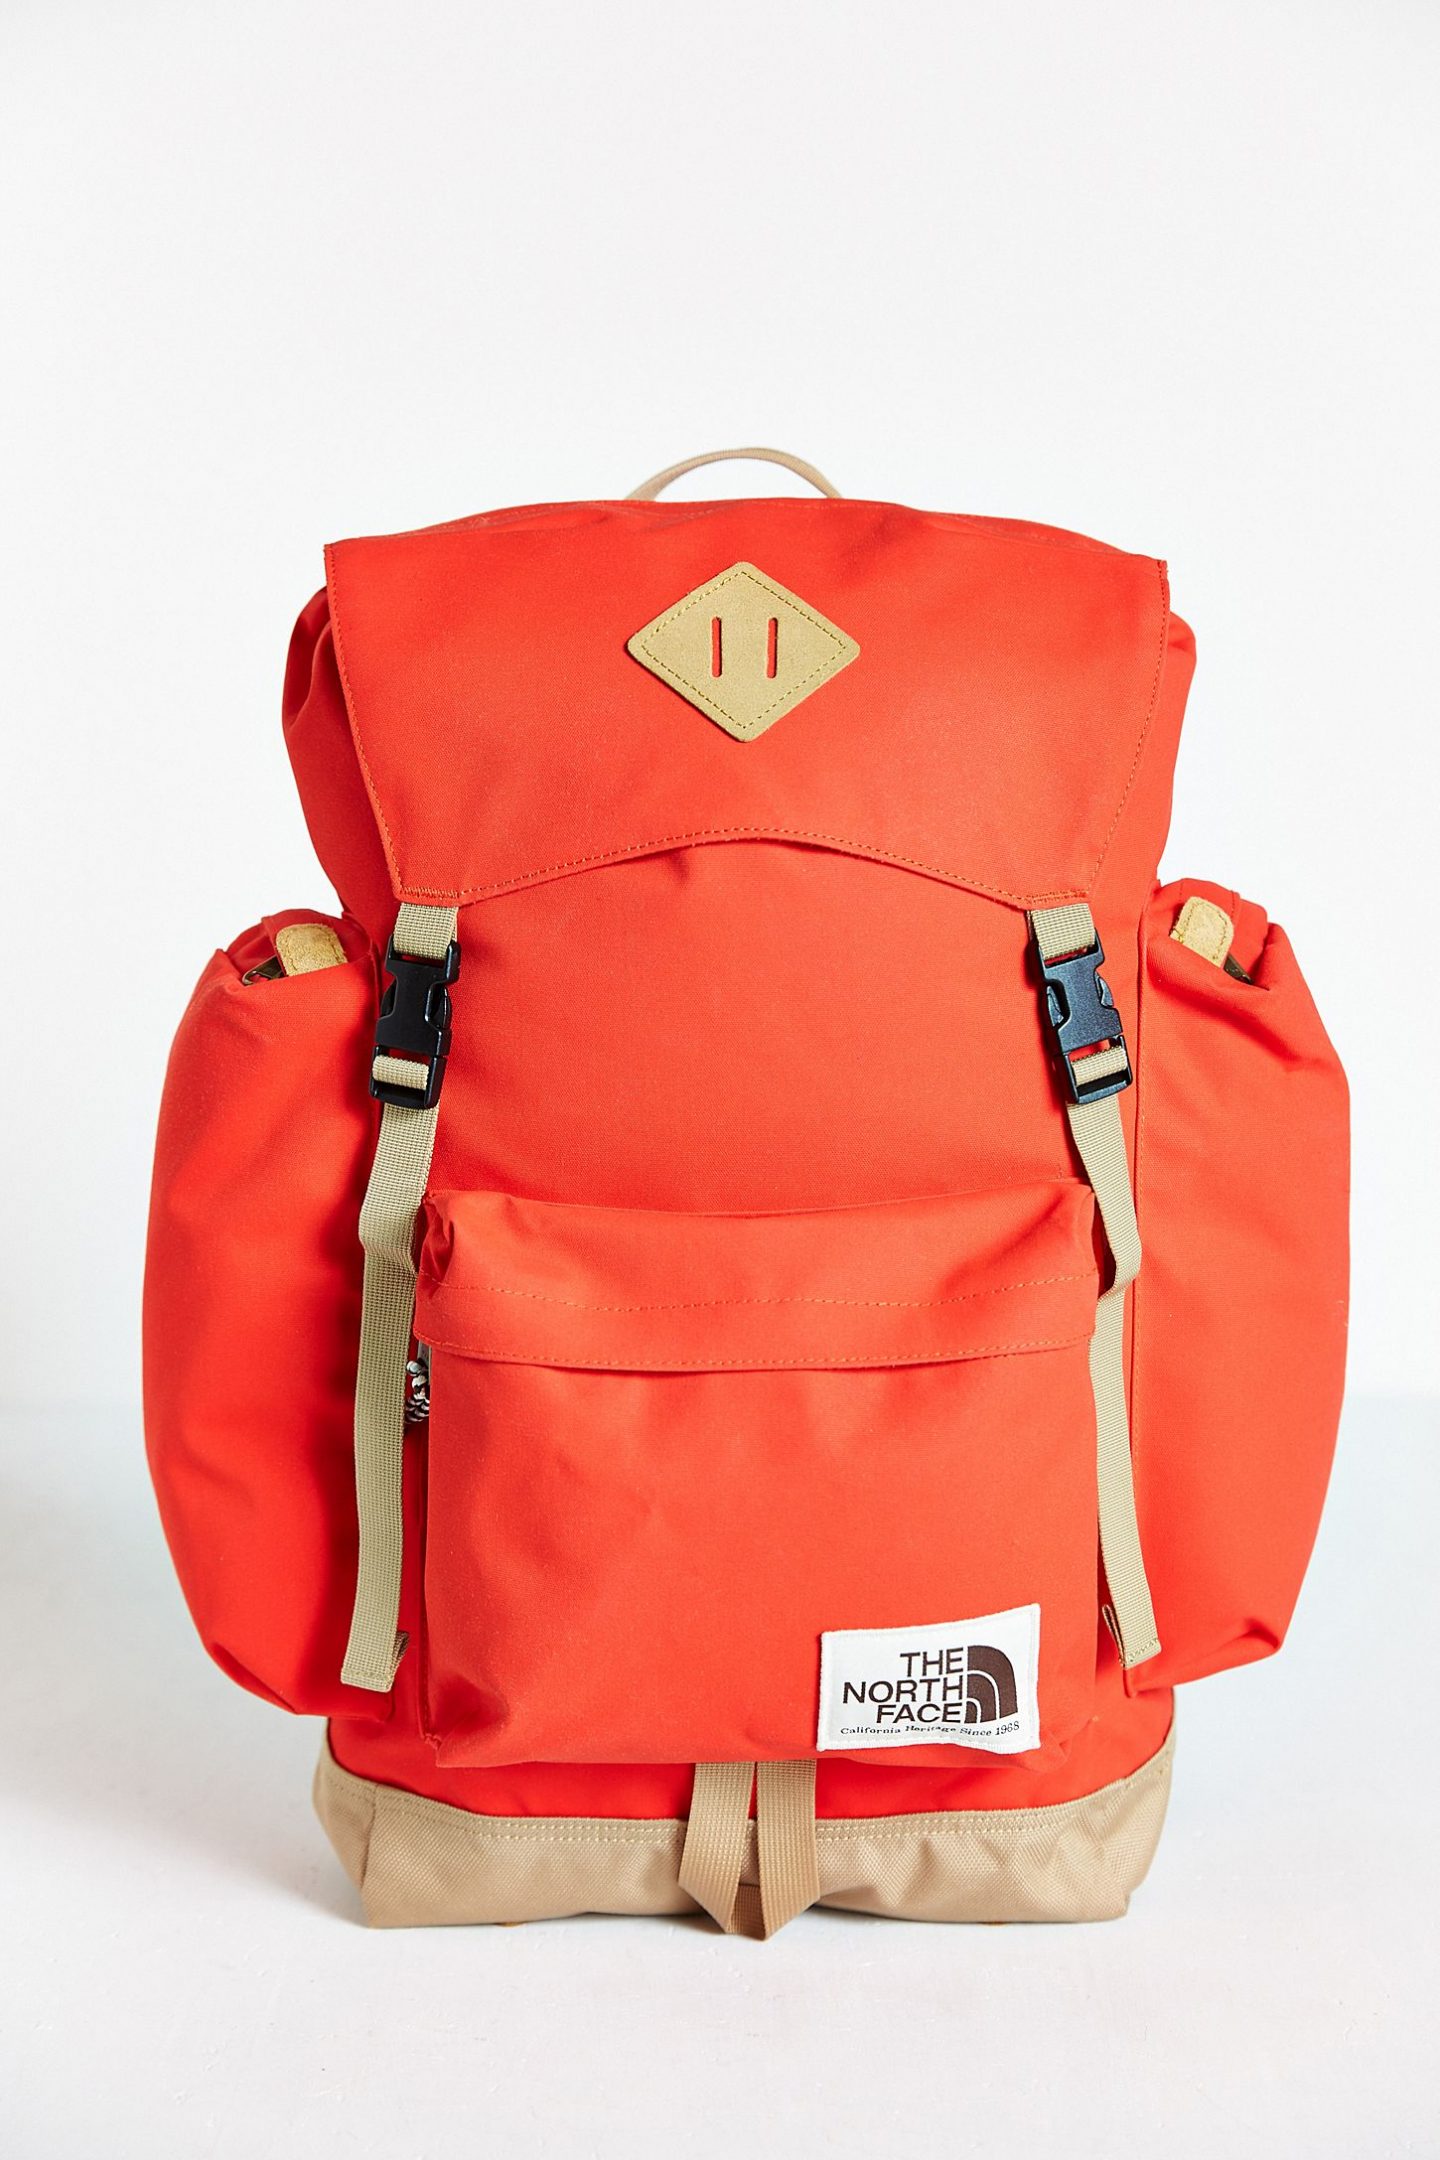 north face baby changing bag